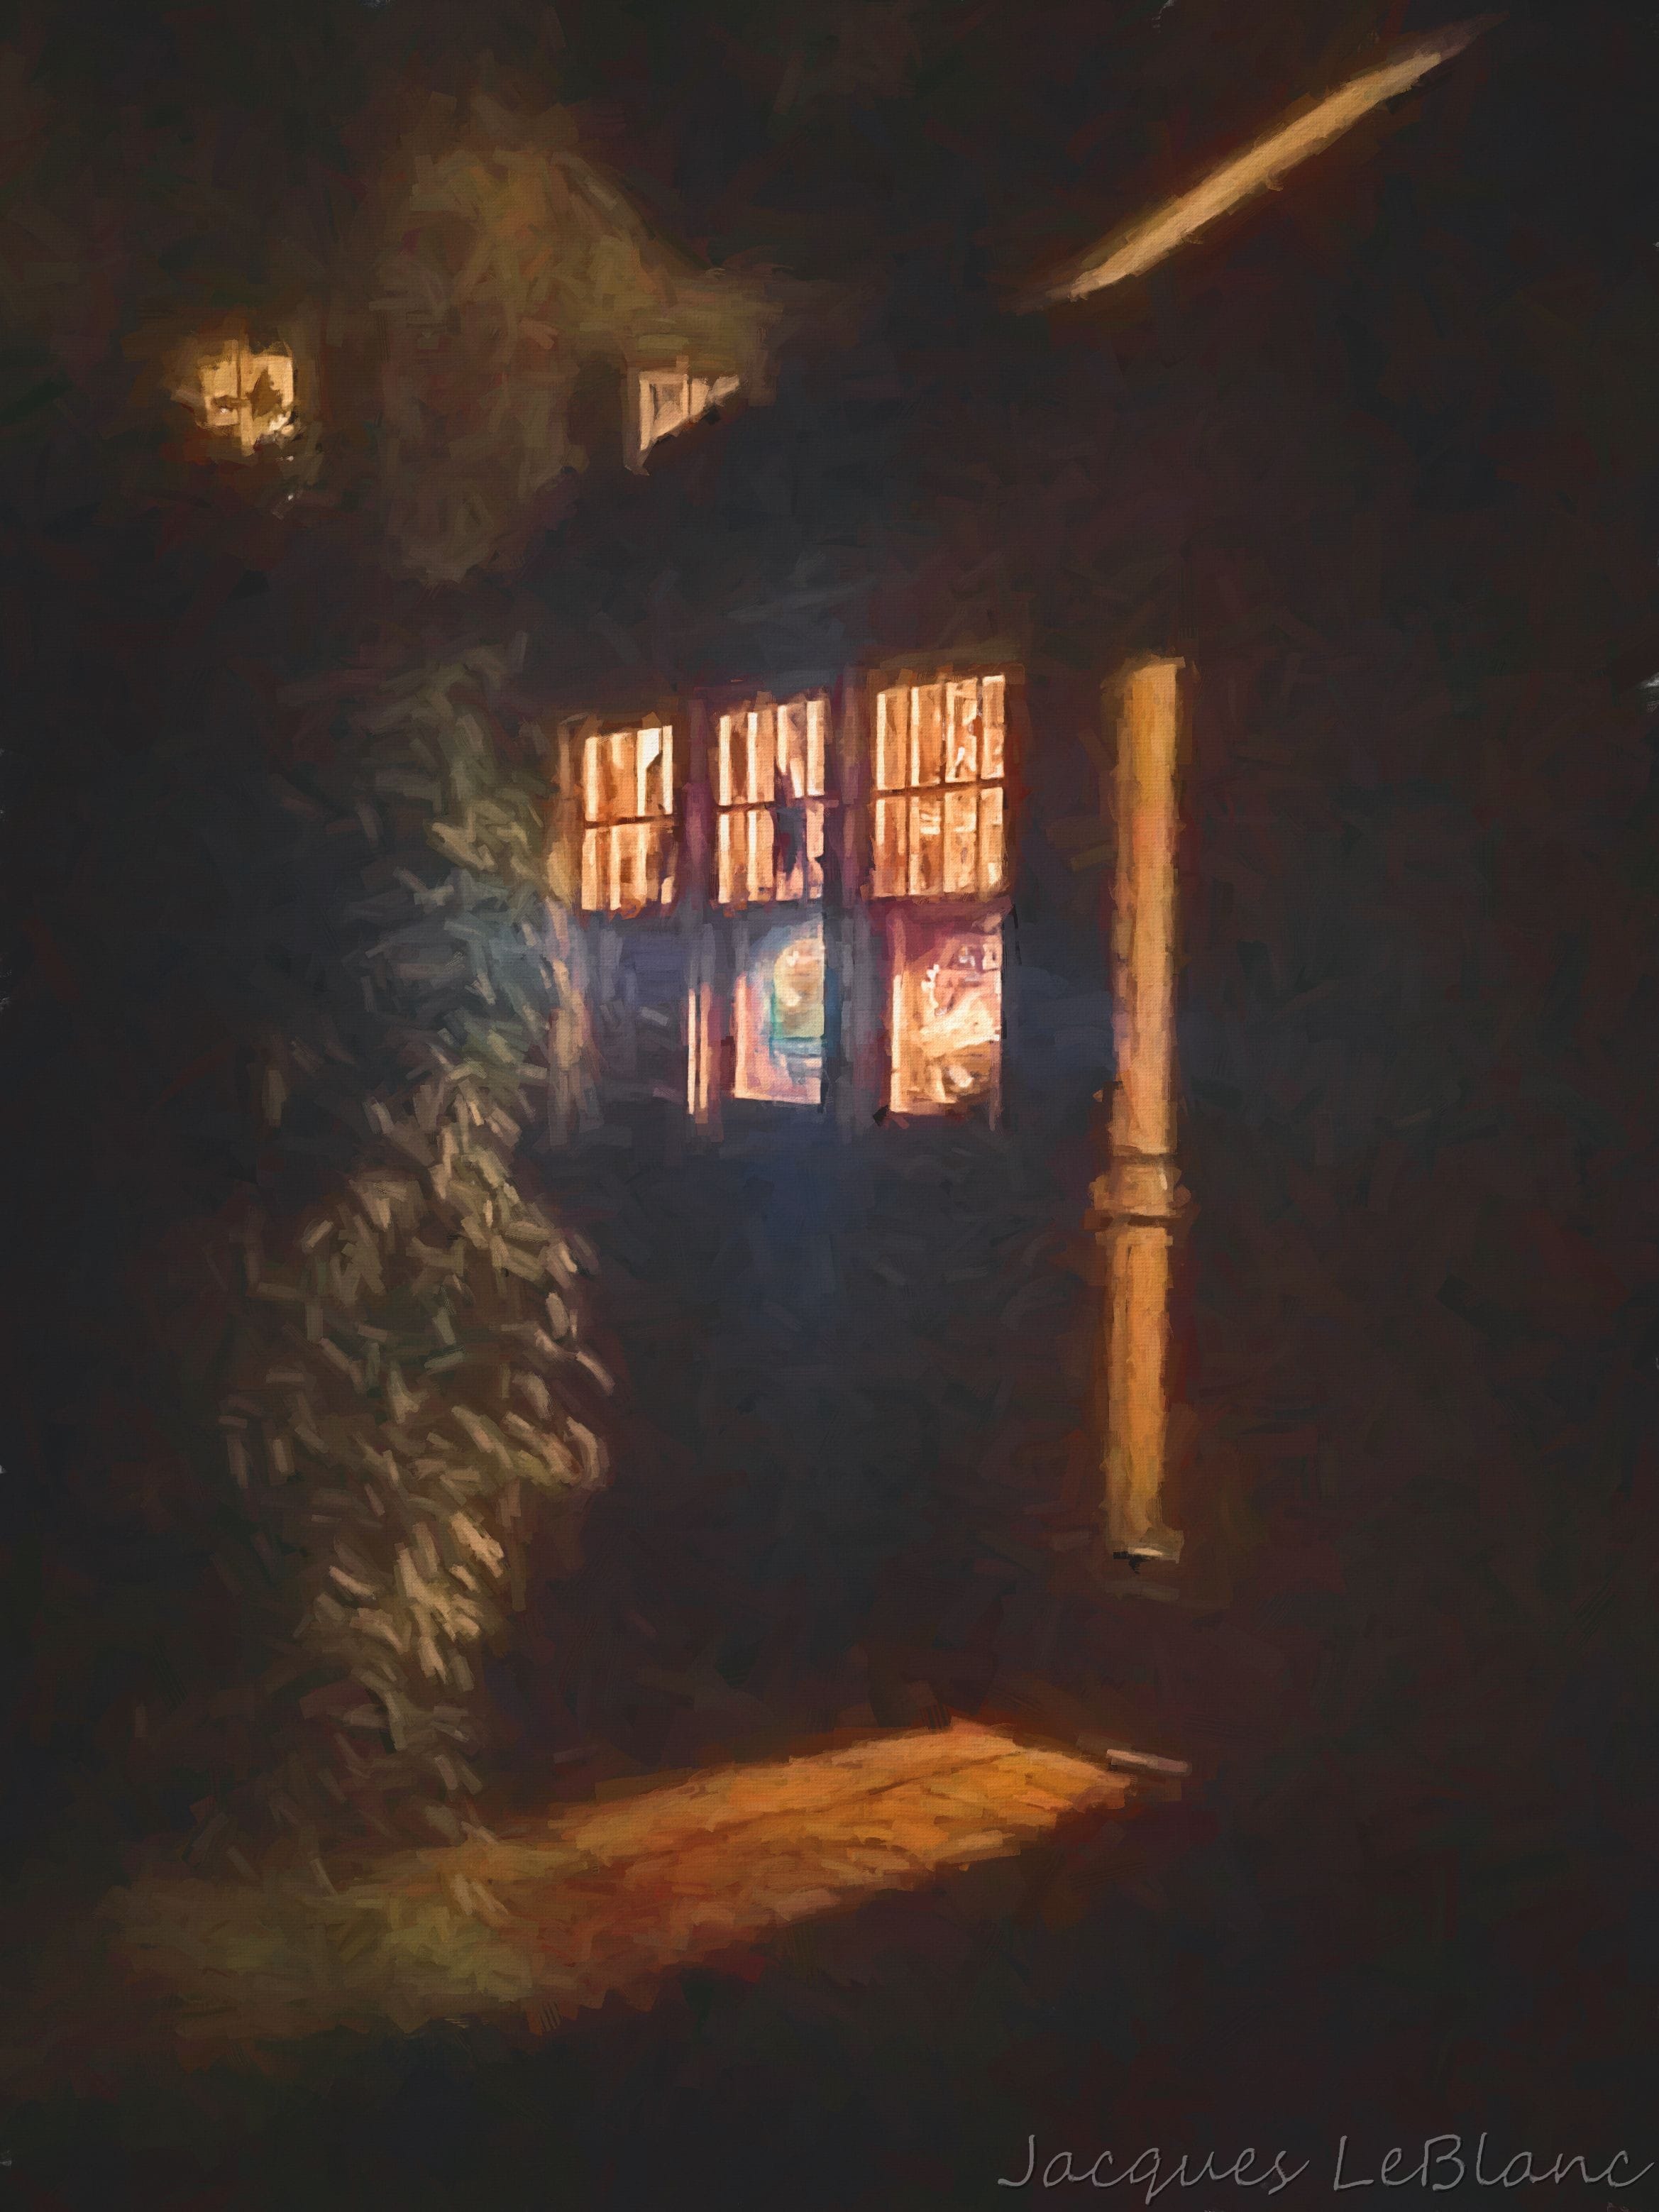 The lights of a workshop flow out of the windows and doors puncture the darkness in glowing red beams. 